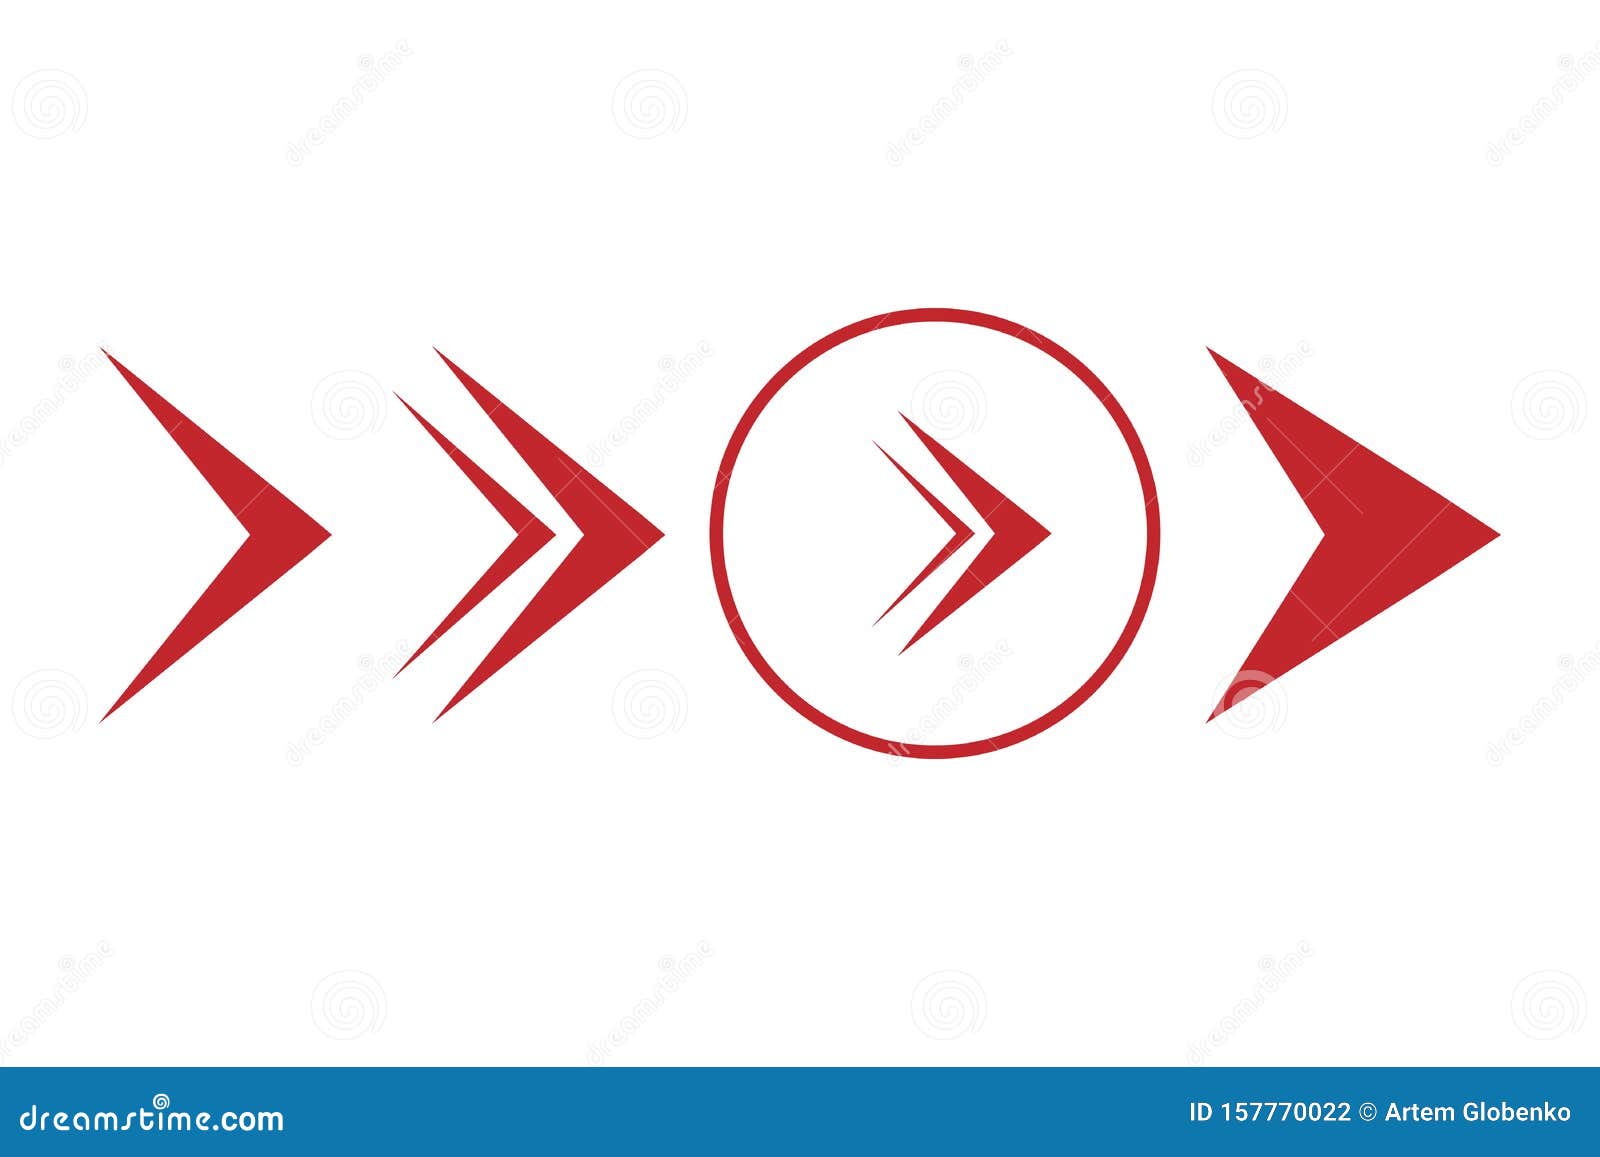 set of red arrows in a flat style.